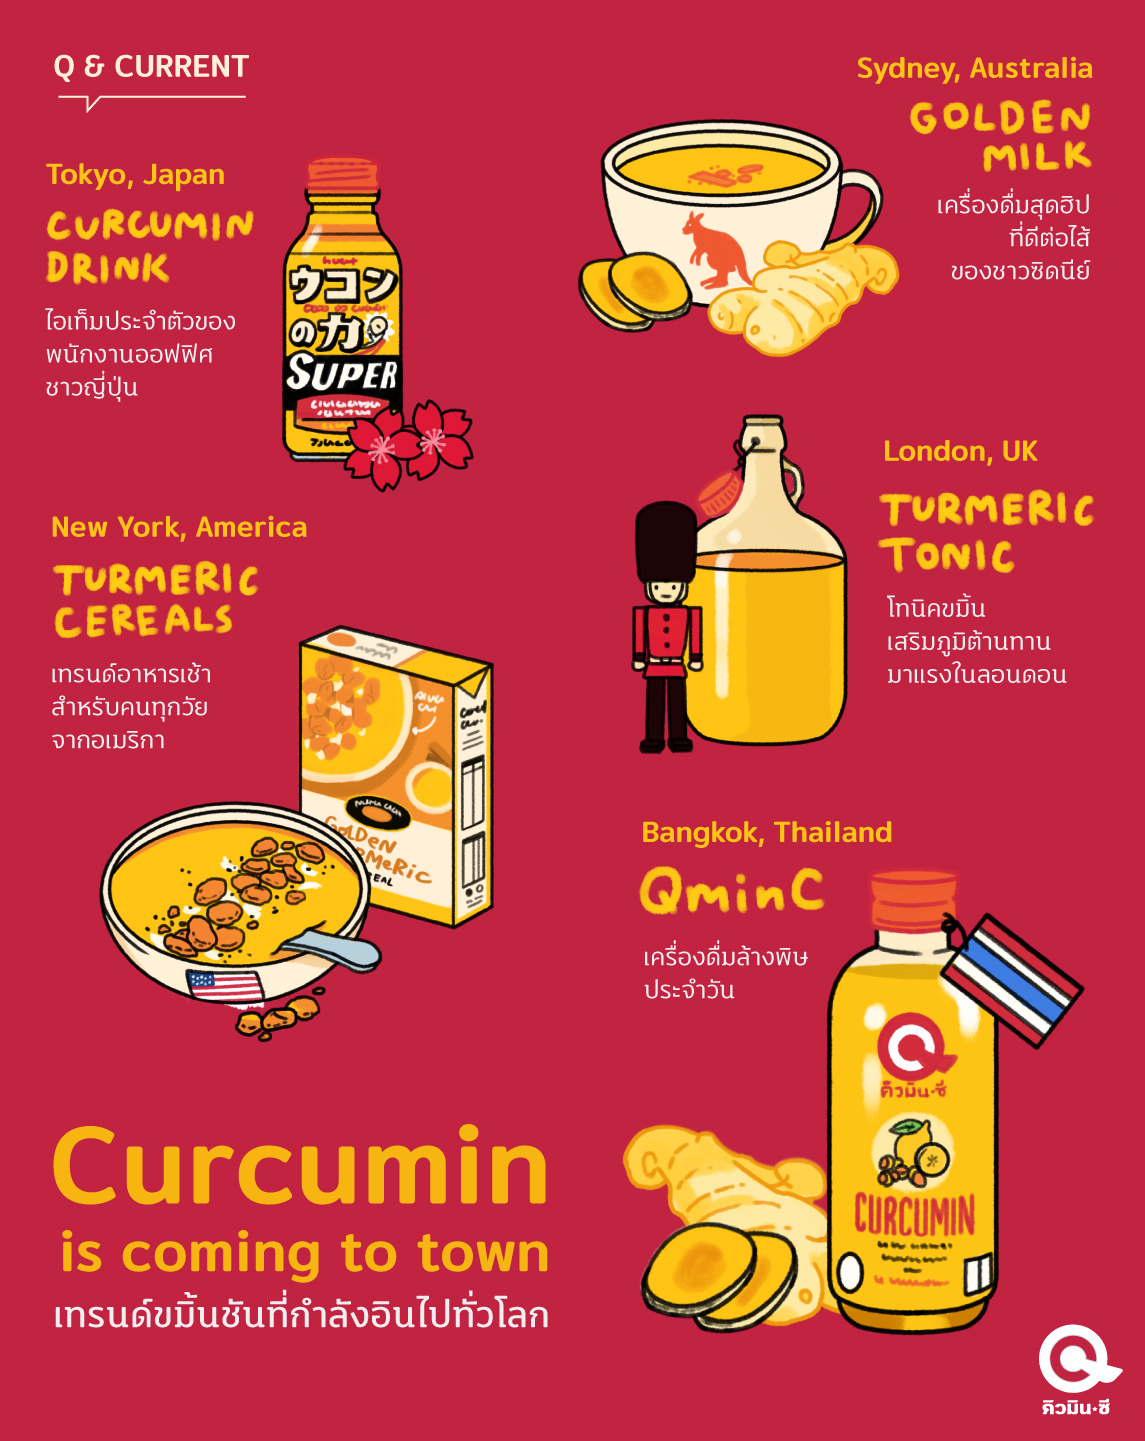 curcumin-is-coming-to-town